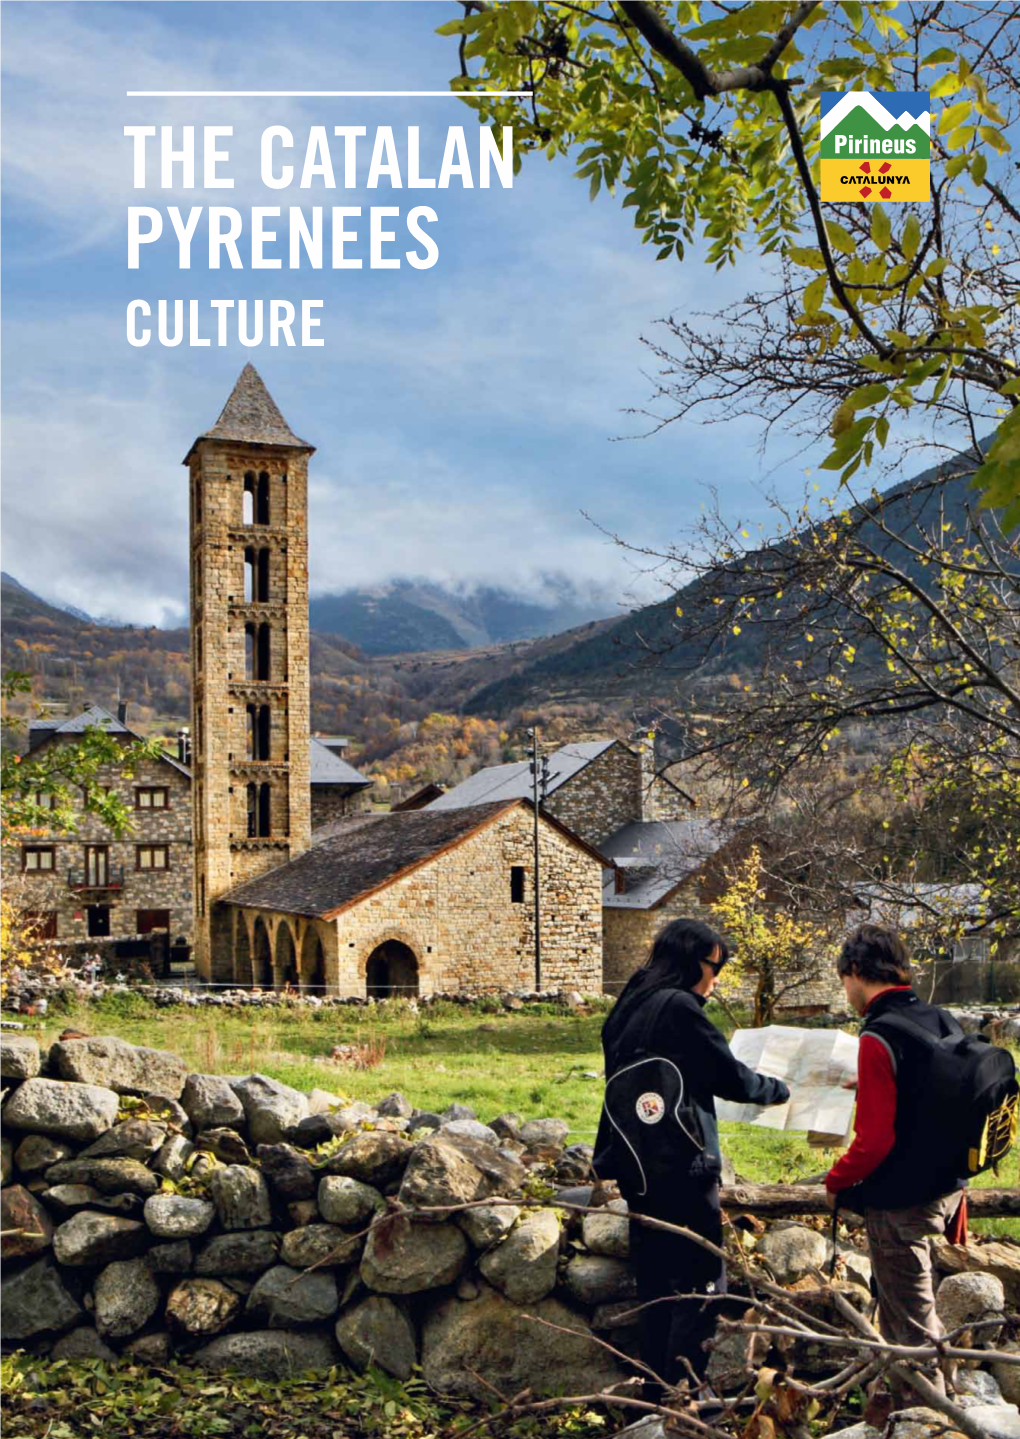 THE CATALAN PYRENEES CULTURE a World of Culture to Discover at the Pyrenee